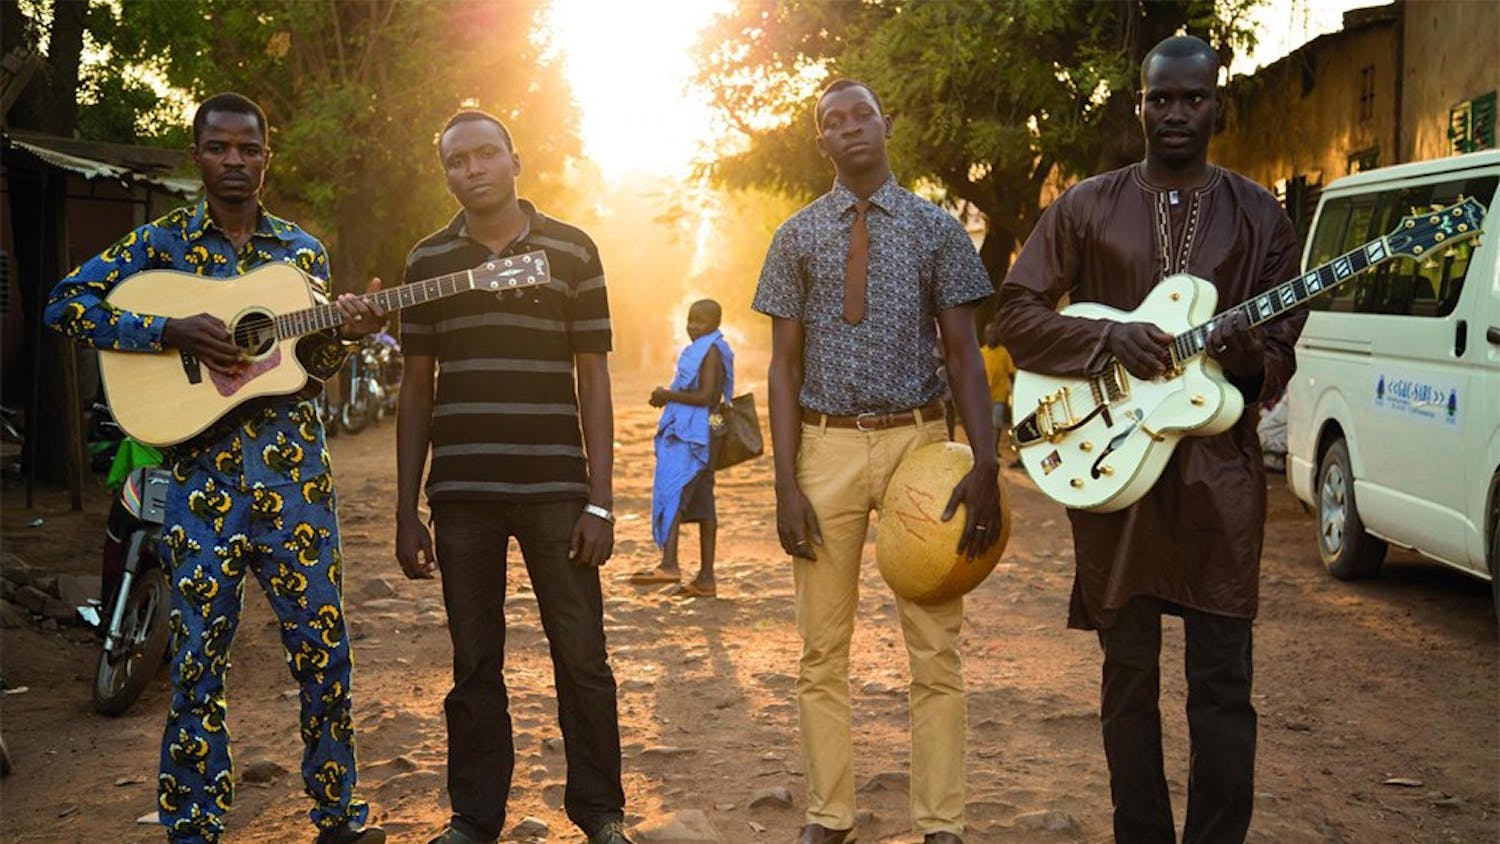 "They Will Have to Kill Us First" follows musicians in Timbuktu organizing a concert after Islamic extremists banned music in Mali. The film will screen Sunday at the Ryder Film Festival.